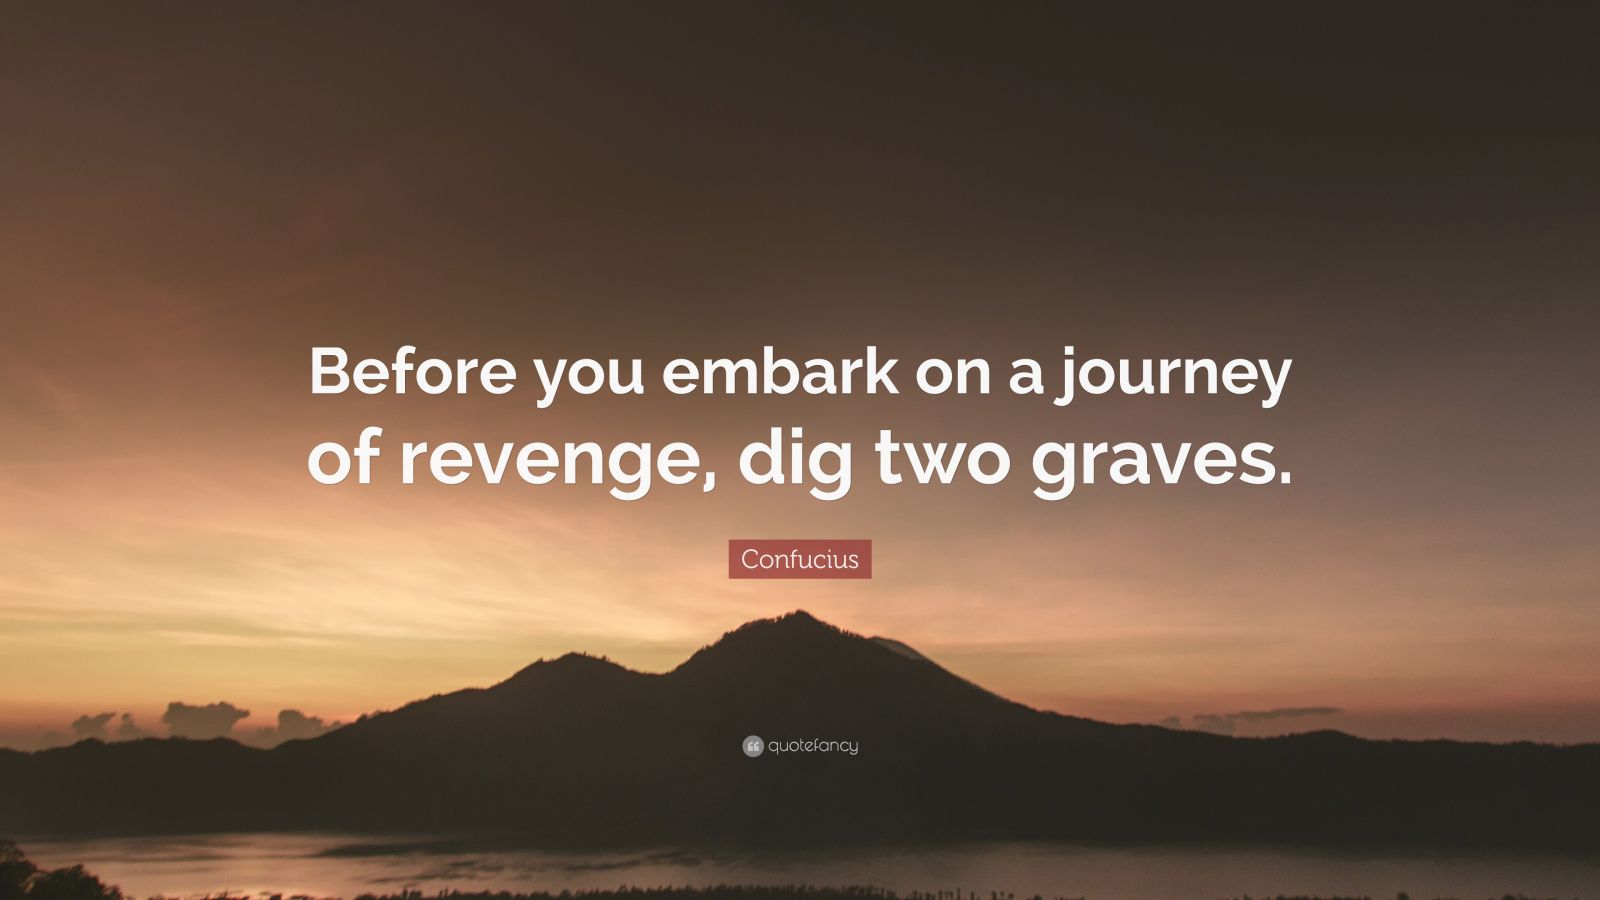 2036421-Confucius-Quote-Before-you-embark-on-a-journey-of-revenge-dig-two.jpg